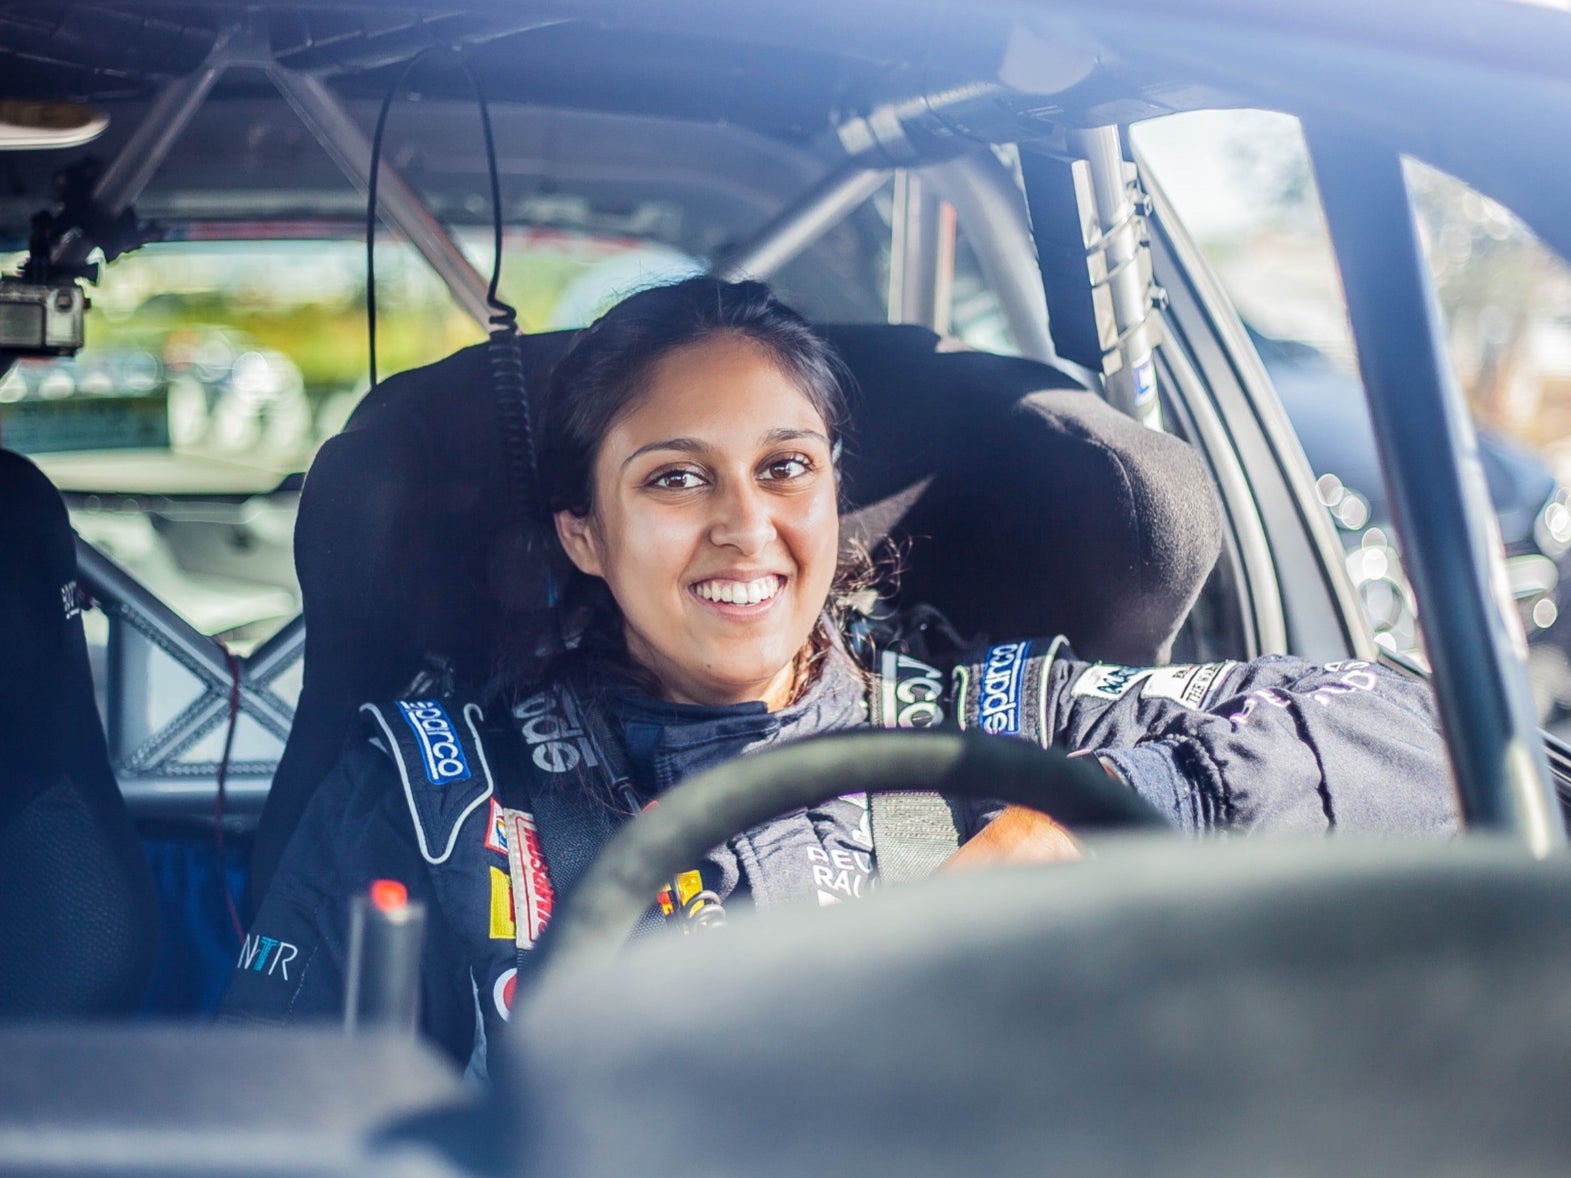 Nabila Tejpar is competing in the European Rally Championship